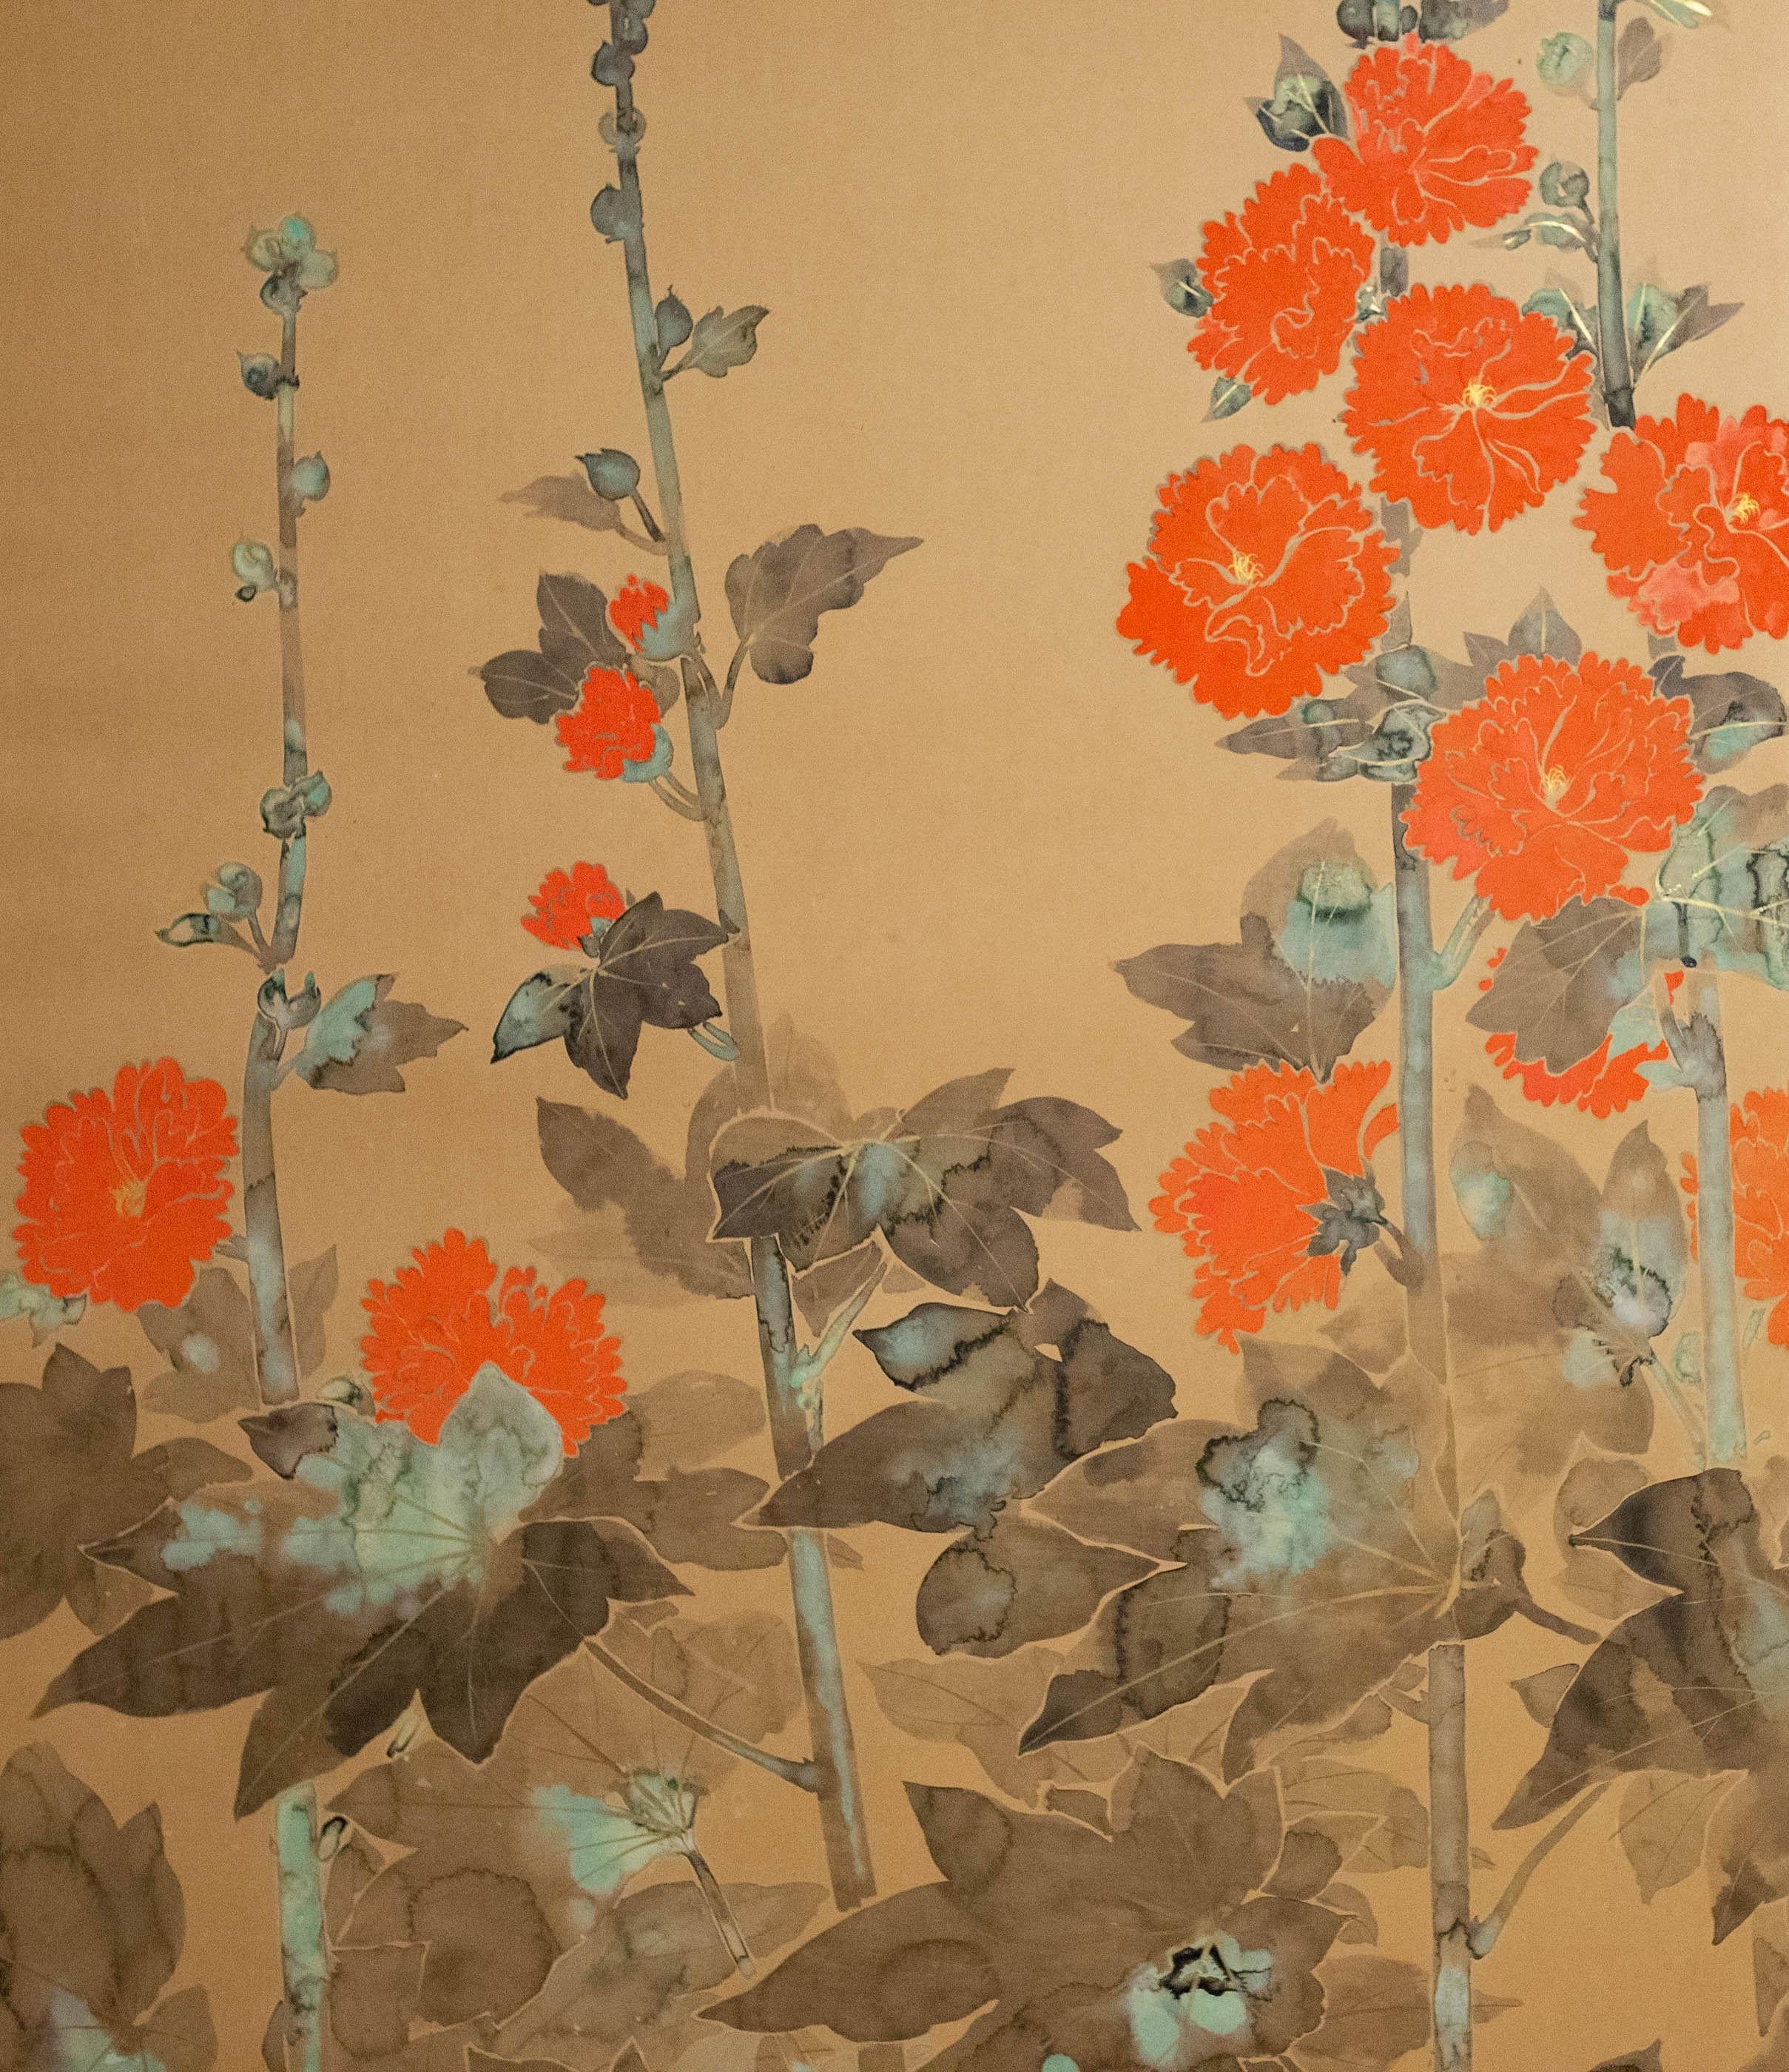 With the vibrant colors, and fine attention to detail and surface typical of a Rimpa painting. Using Rimpa style tarashikomi painting technique with mineral pigments on mulberry paper, and silk brocade border. Good condition.